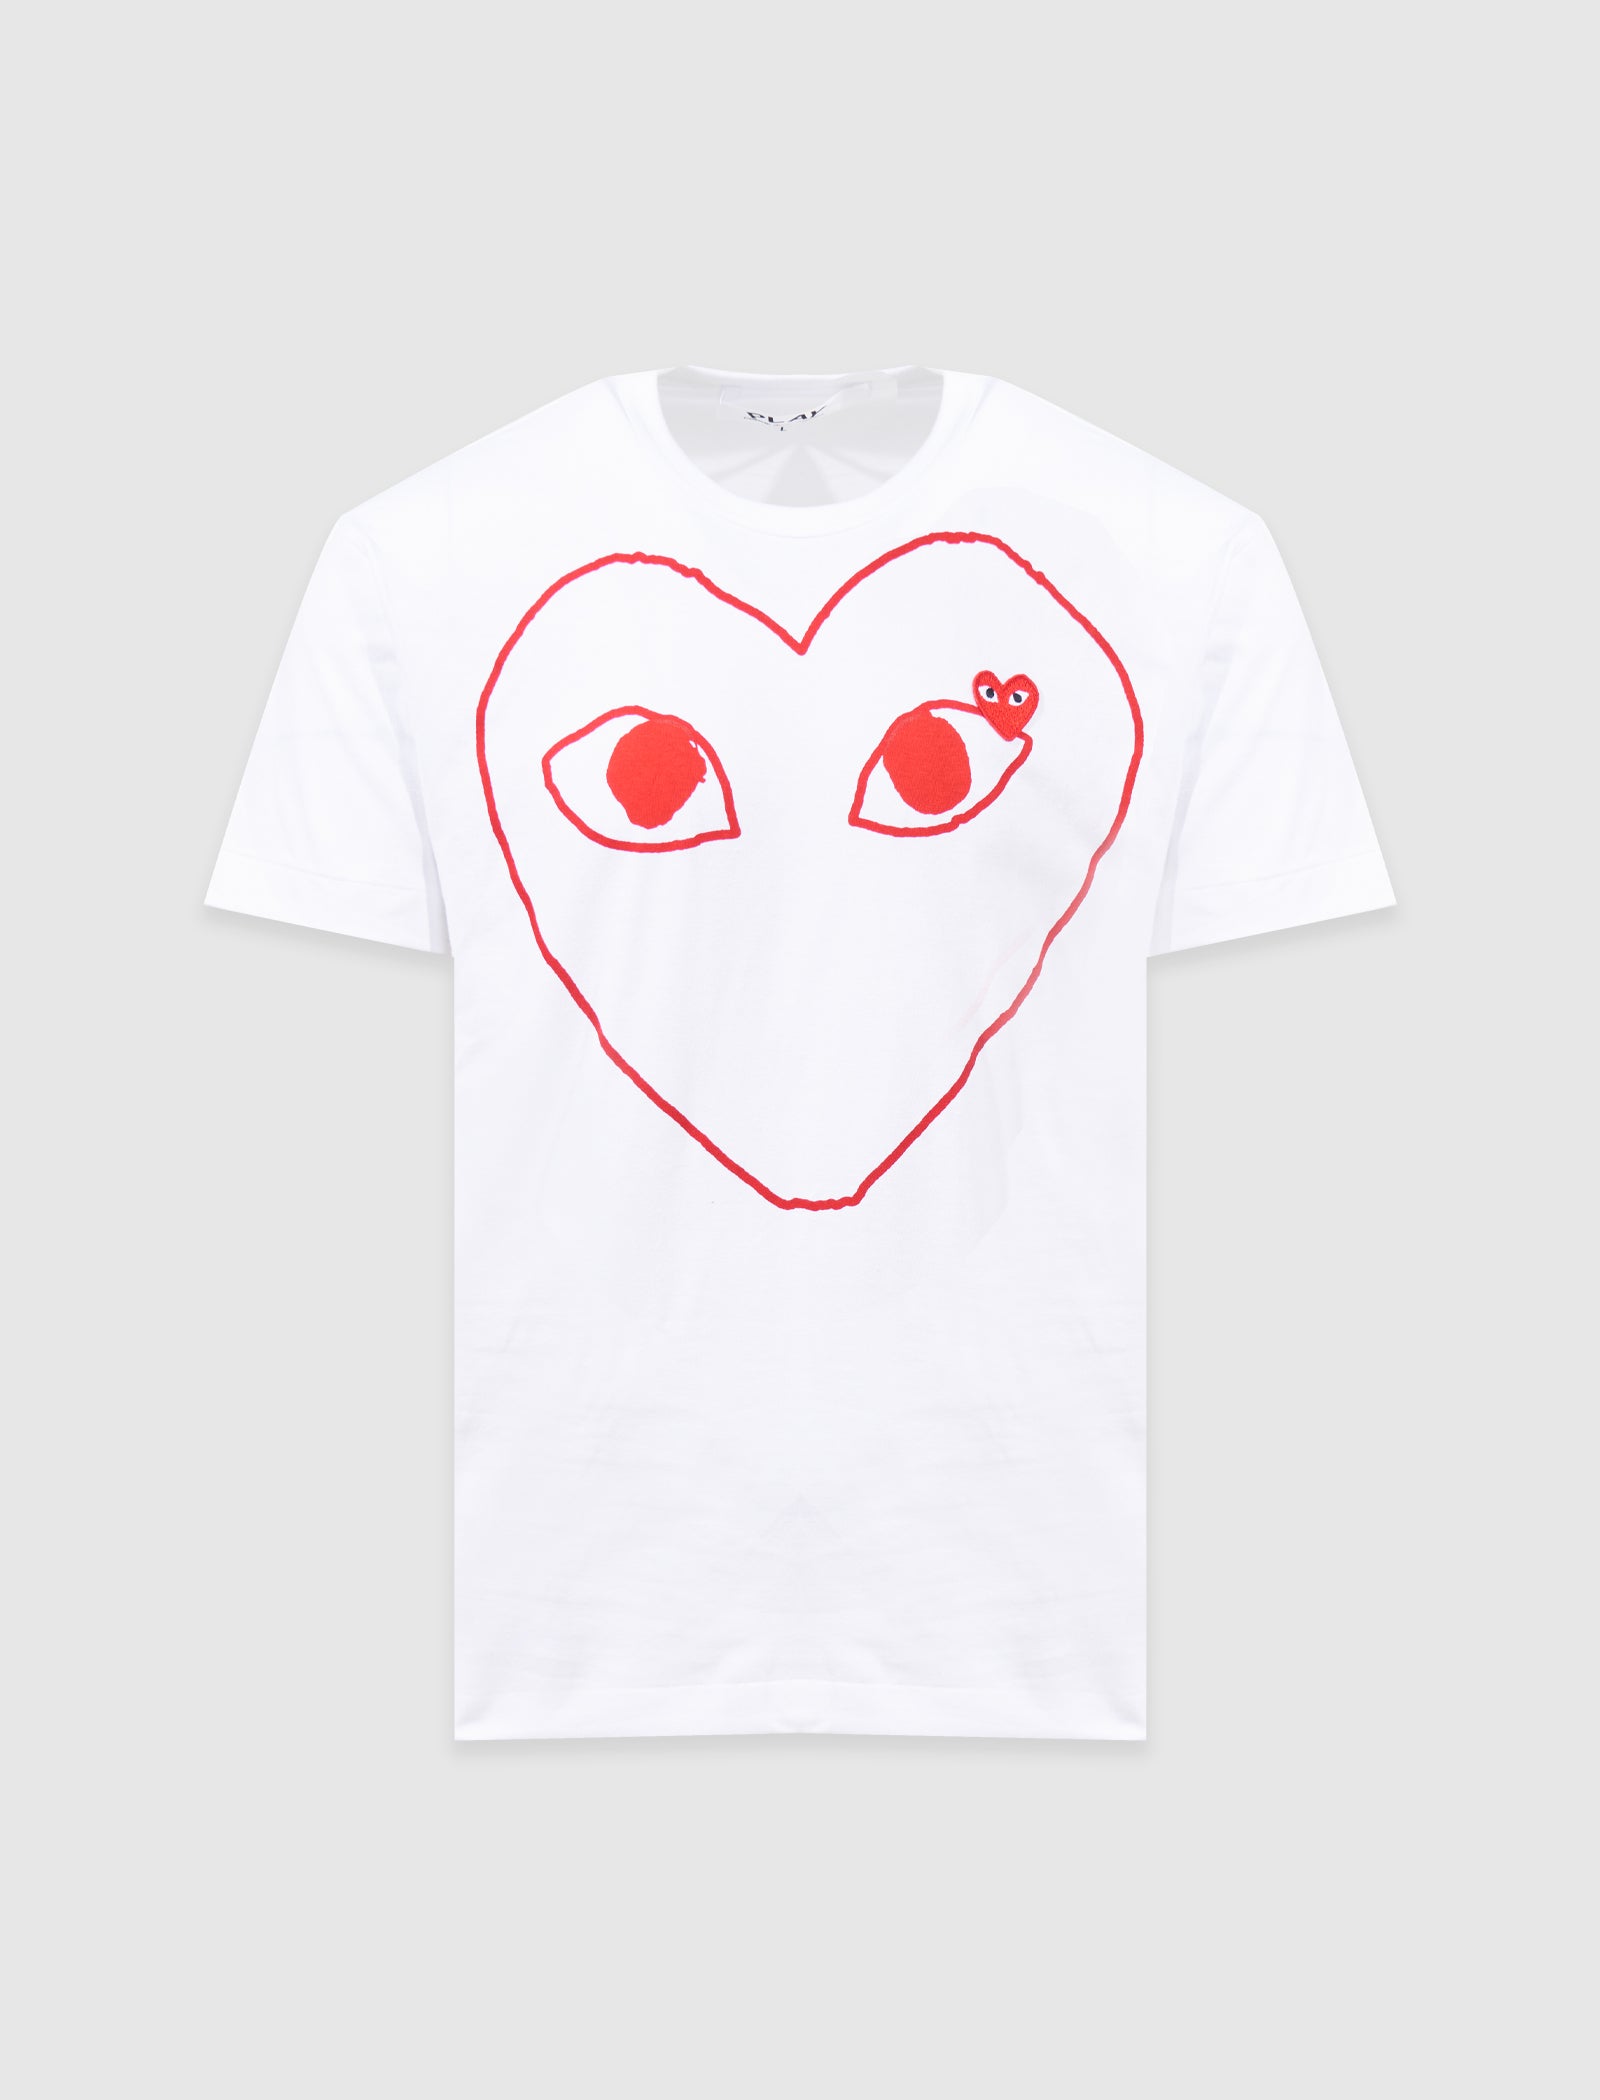 CDG PLAY is now at APB! – APB Store